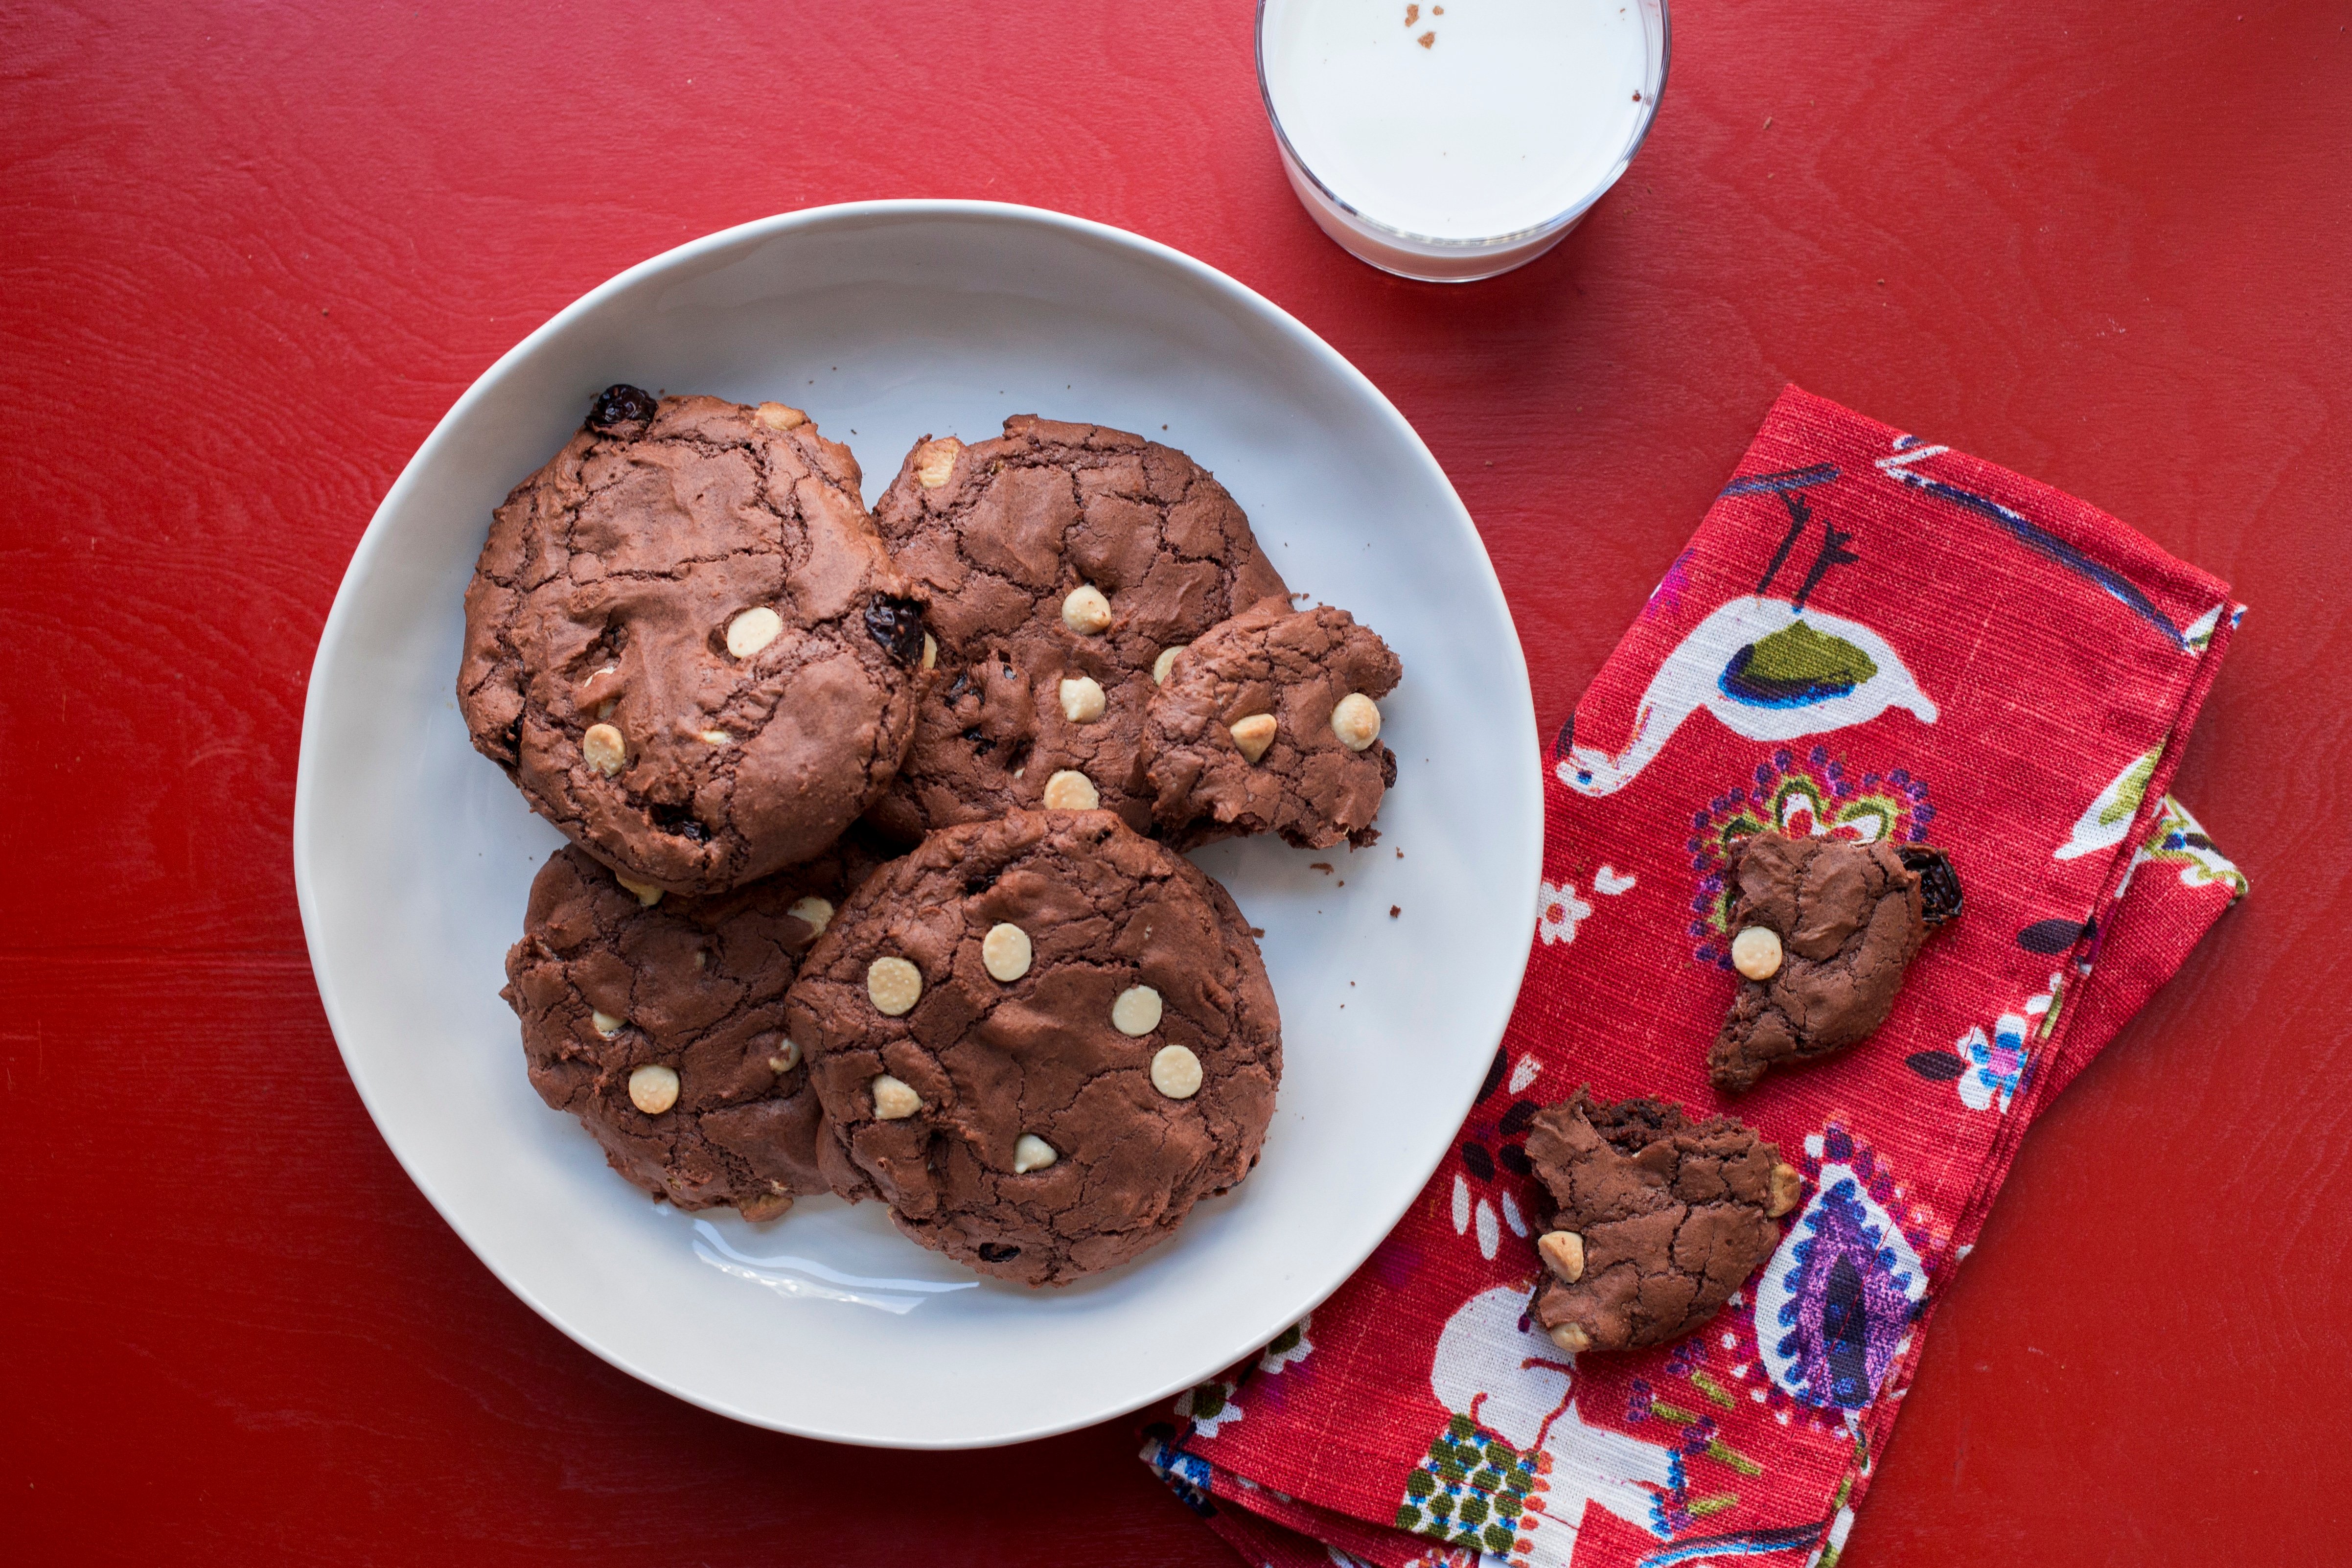 Big Chewy Brownie Cookies with Dried Cherries and White Chocolate Chips on a white plate.